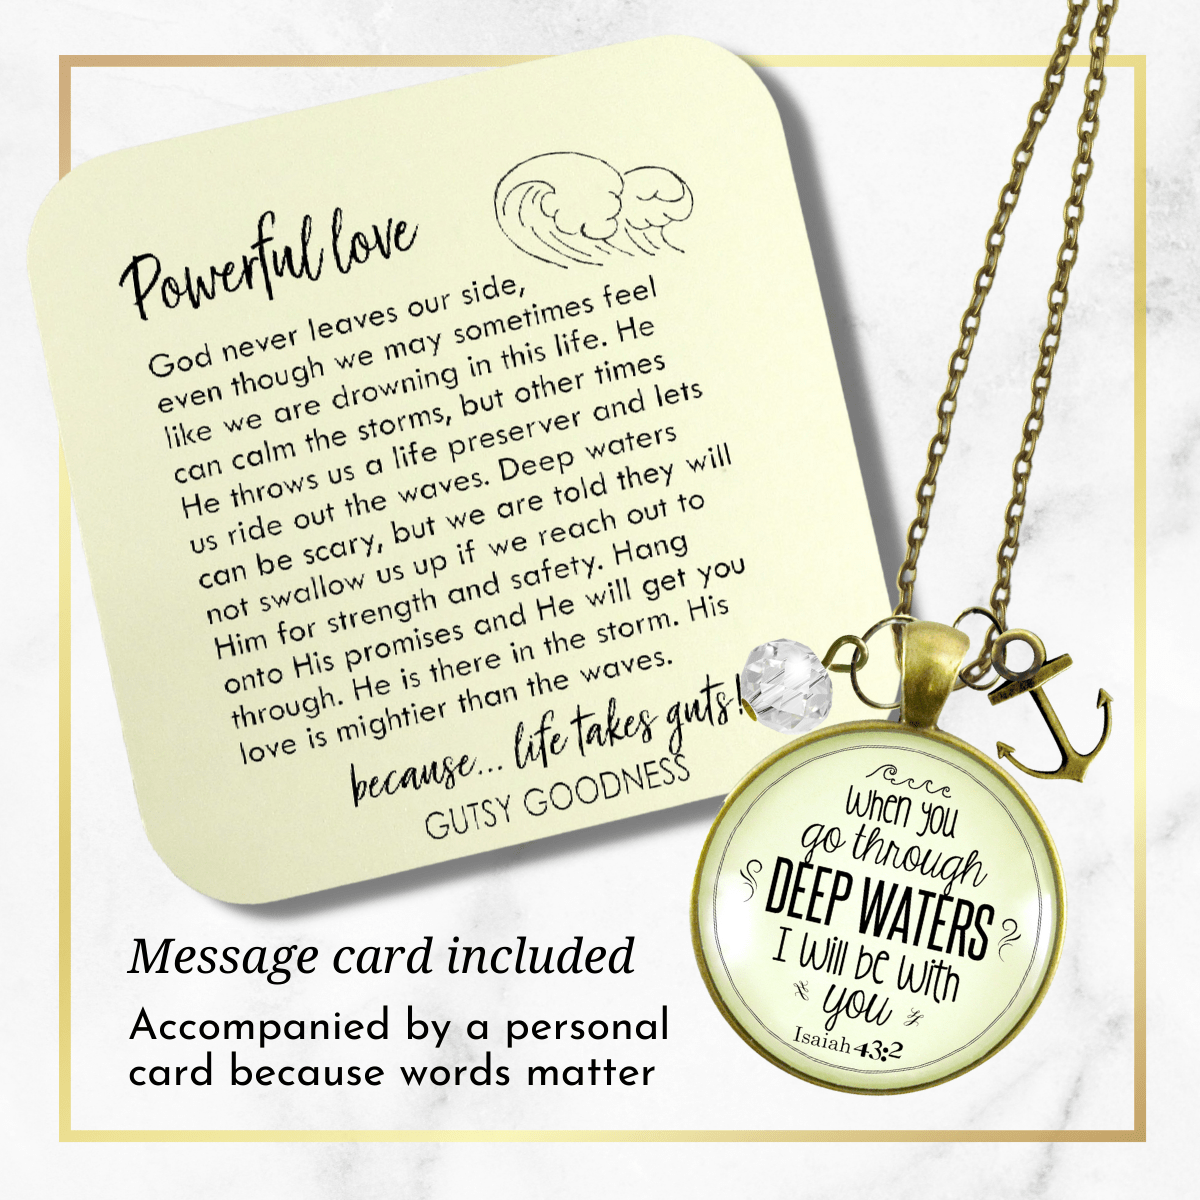 Gutsy Goodness Anchor Necklace Deep Waters Faith Inspired Life Verse Womens Jewelry Gift - Gutsy Goodness Handmade Jewelry;Anchor Necklace Deep Waters Faith Inspired Life Verse Womens Jewelry Gift - Gutsy Goodness Handmade Jewelry Gifts